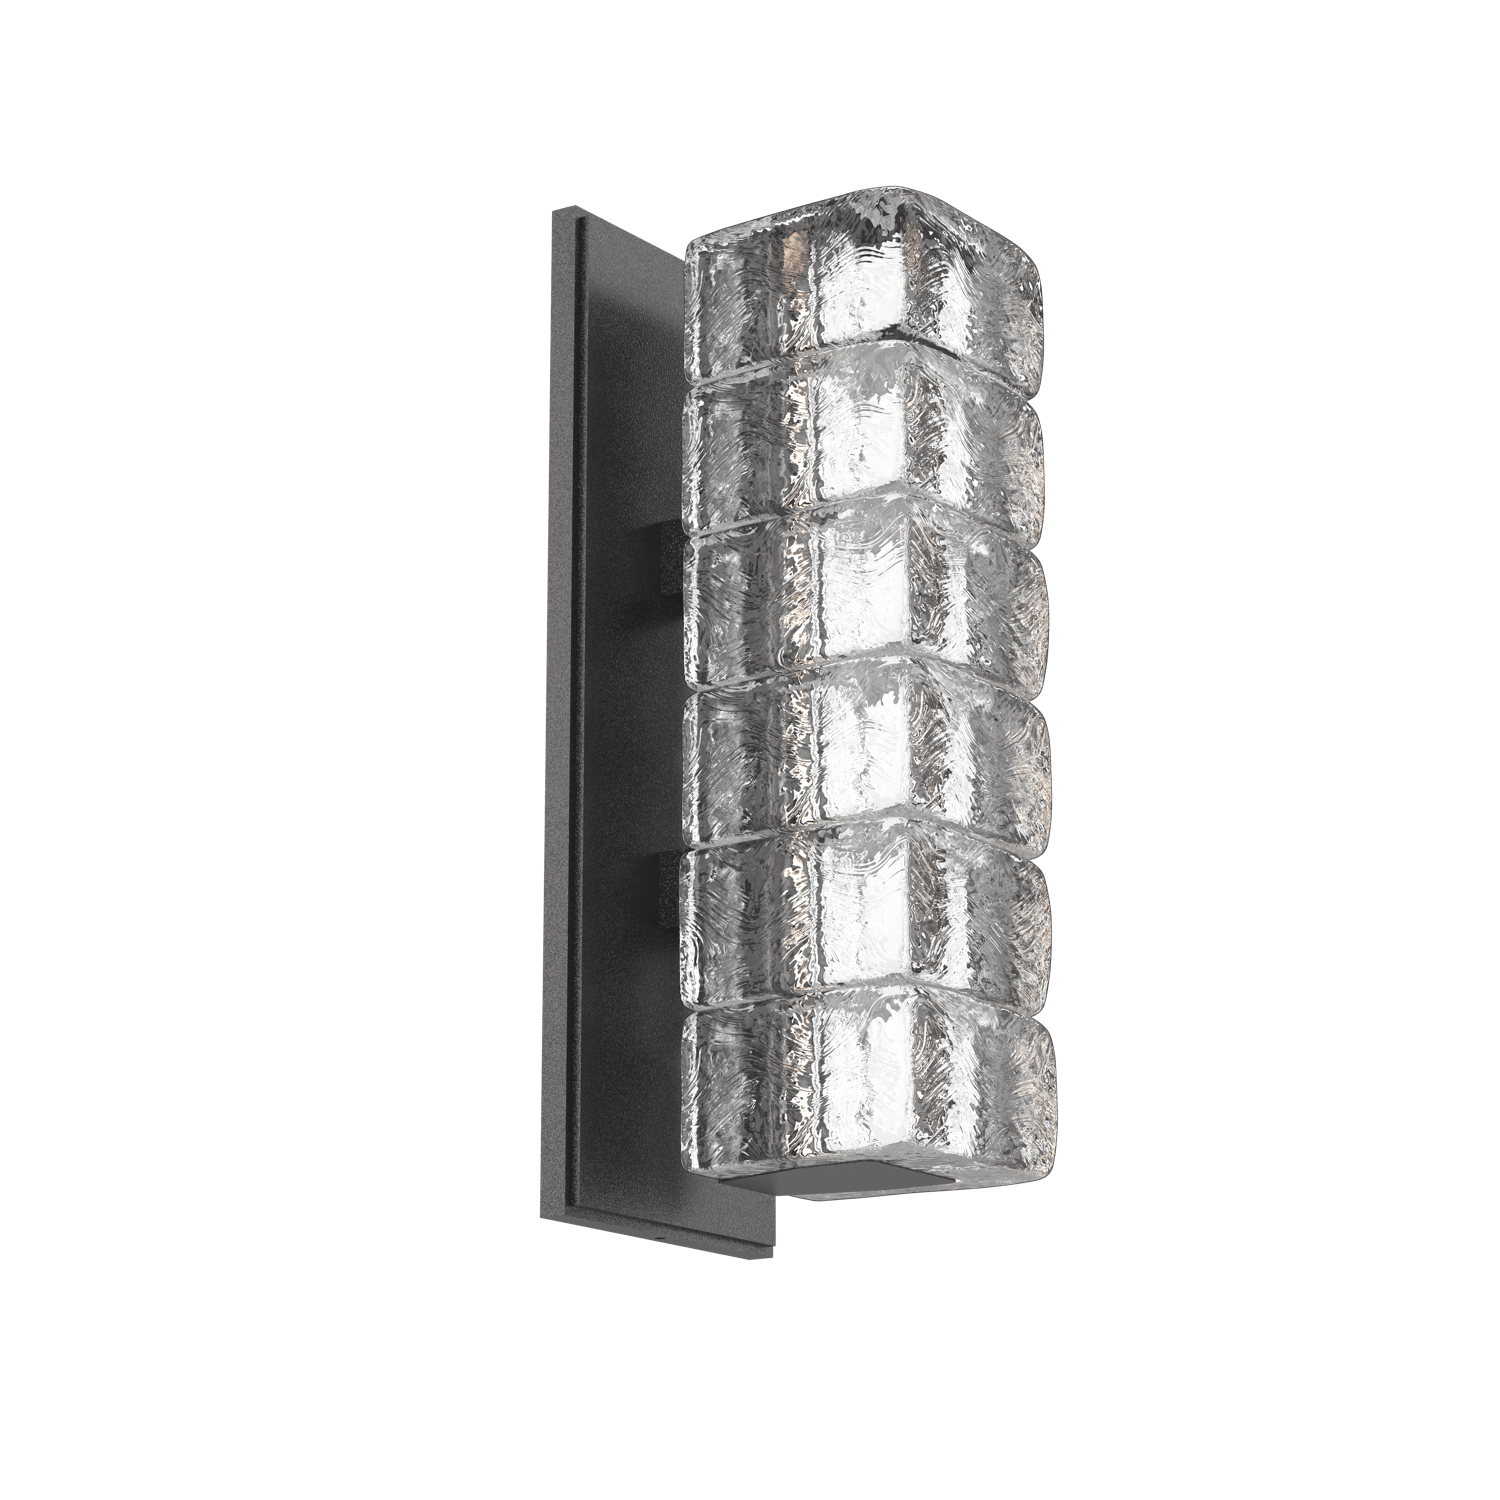 IDB0080-01-GP-Hammerton-Studio-Asscher-wall-sconce-with-graphite-finish-and-clear-cast-glass-shades-and-LED-lamping